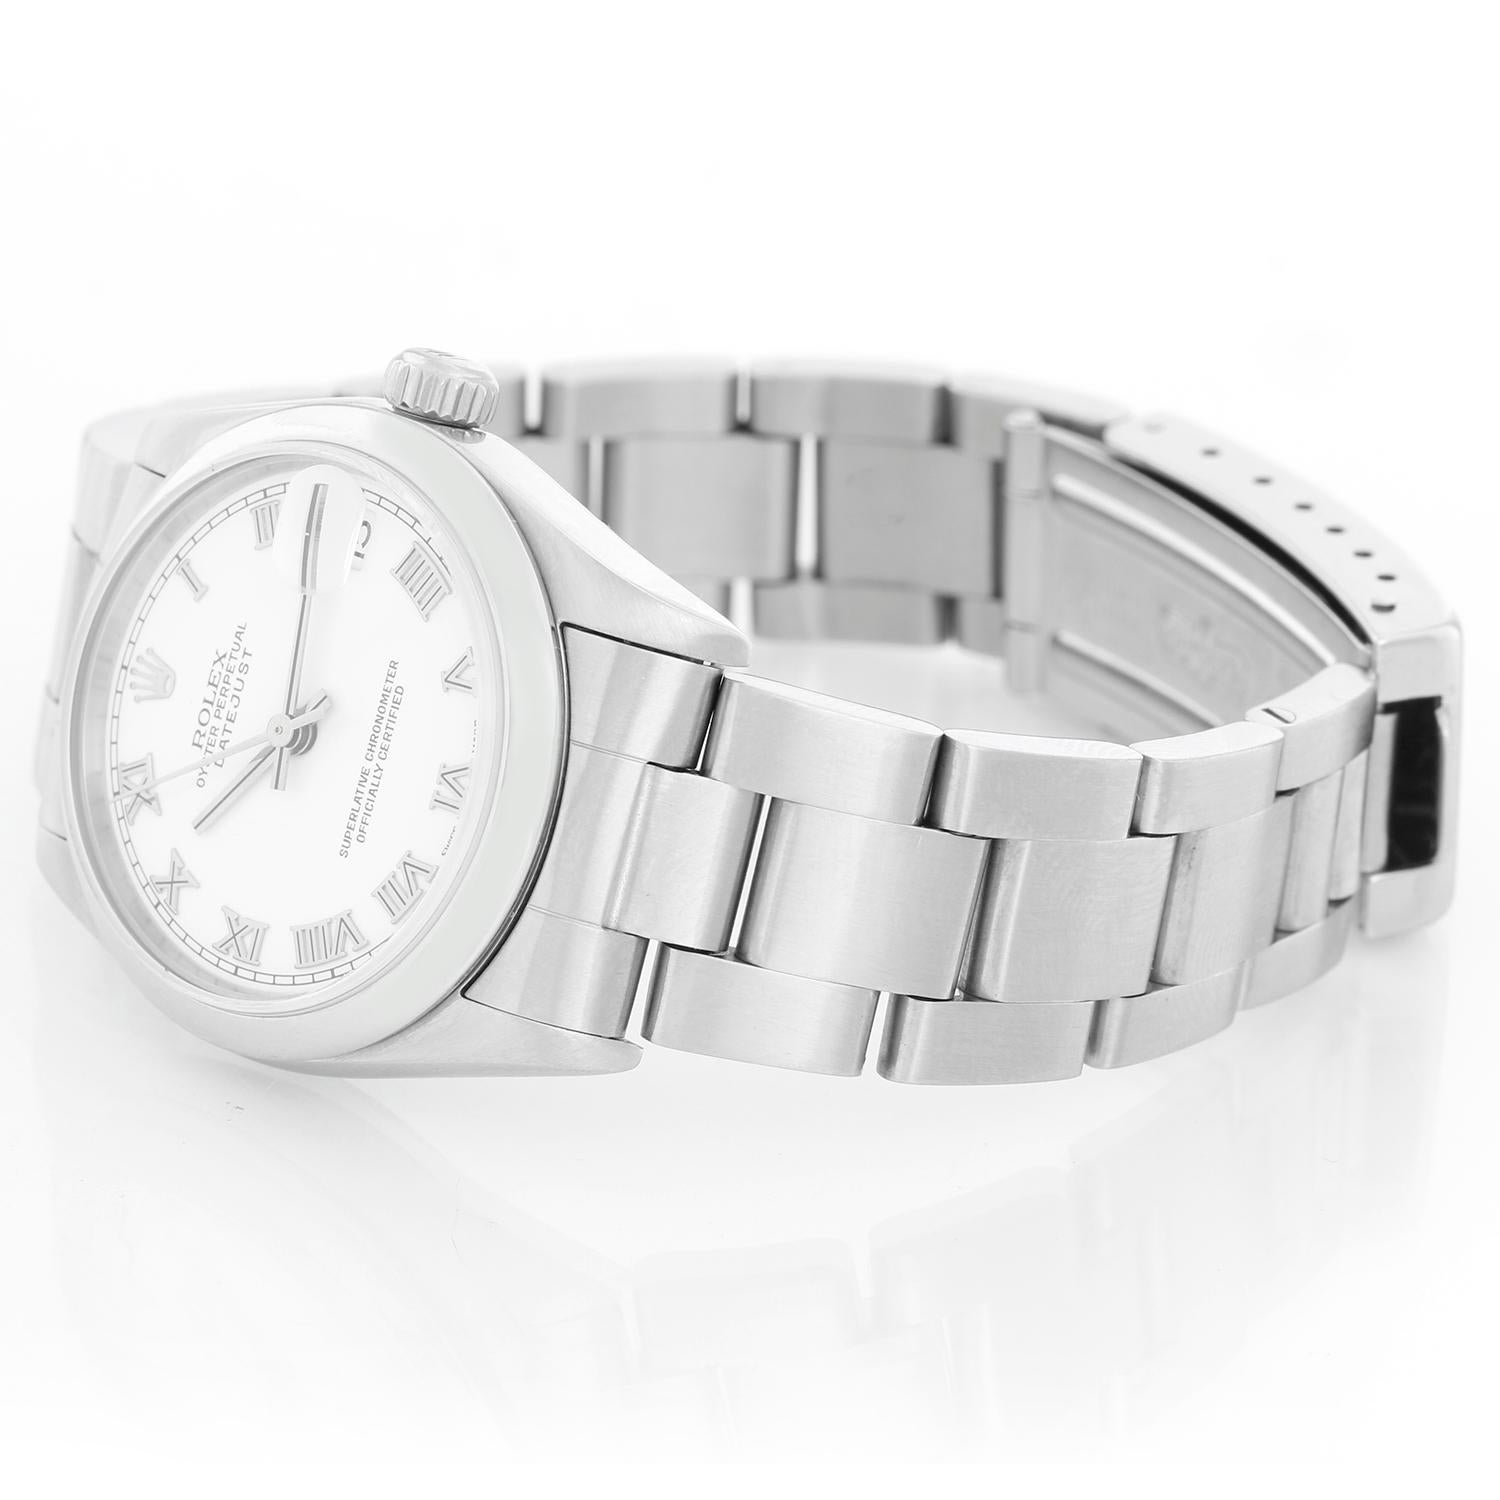 Rolex Midsize Date Stainless Steel Watch 78240 - Automatic winding, 31 jewels, Quickset, sapphire crystal. Stainless steel case with white gold smooth bezel 26mm diameter. White dial with Roman numerals . Stainless steel Oyster bracelet. Pre-owned